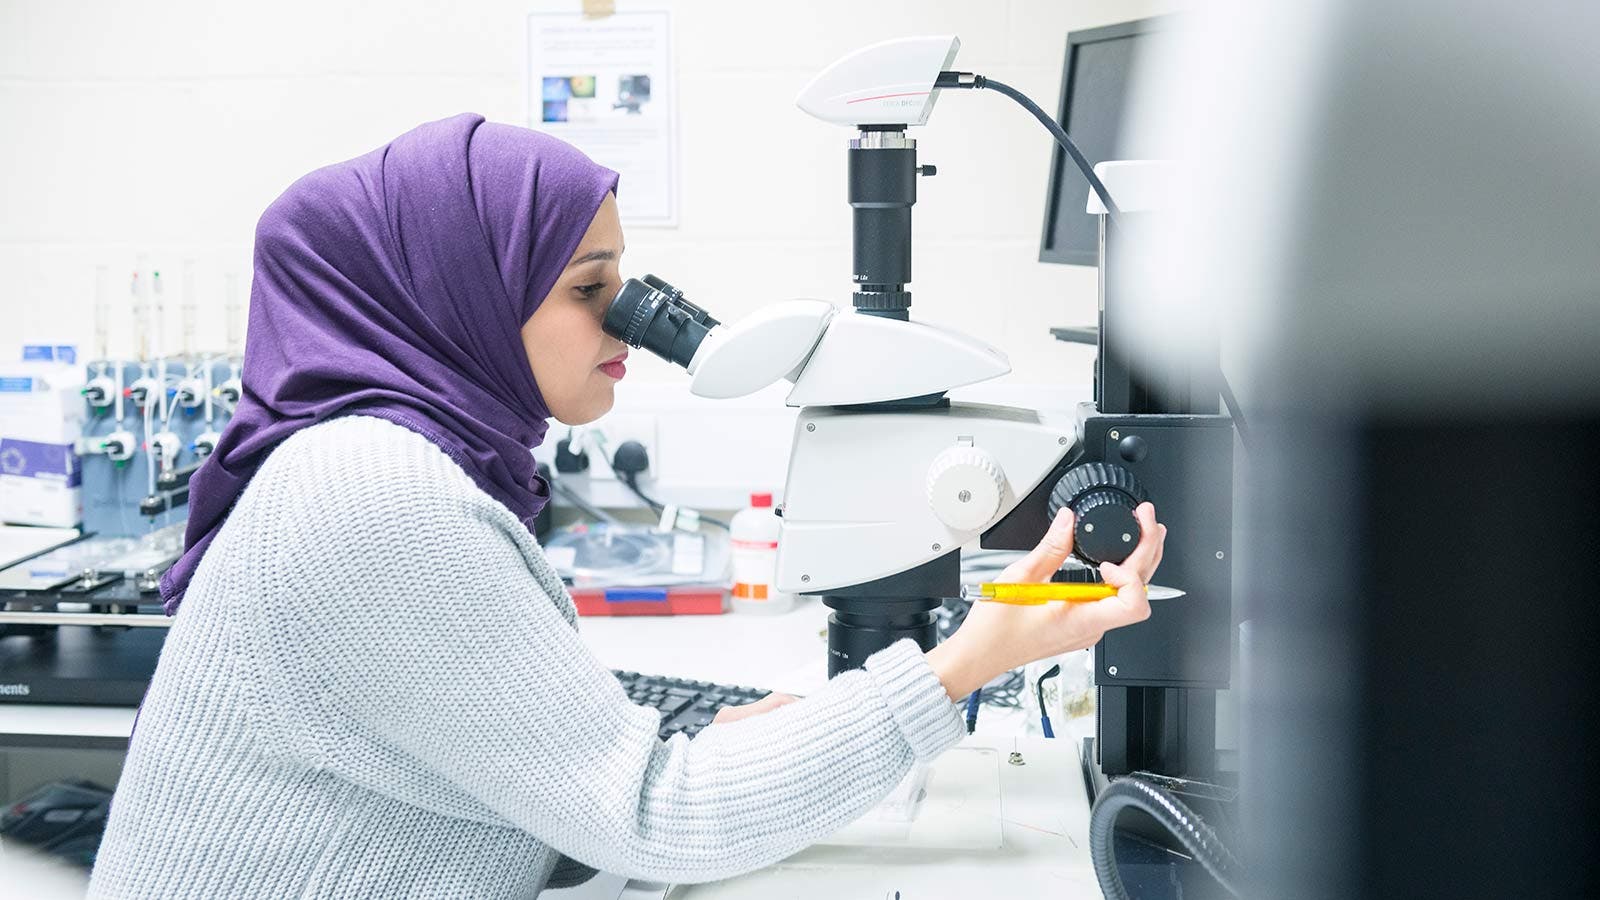 A University of Sussex student using a microscope